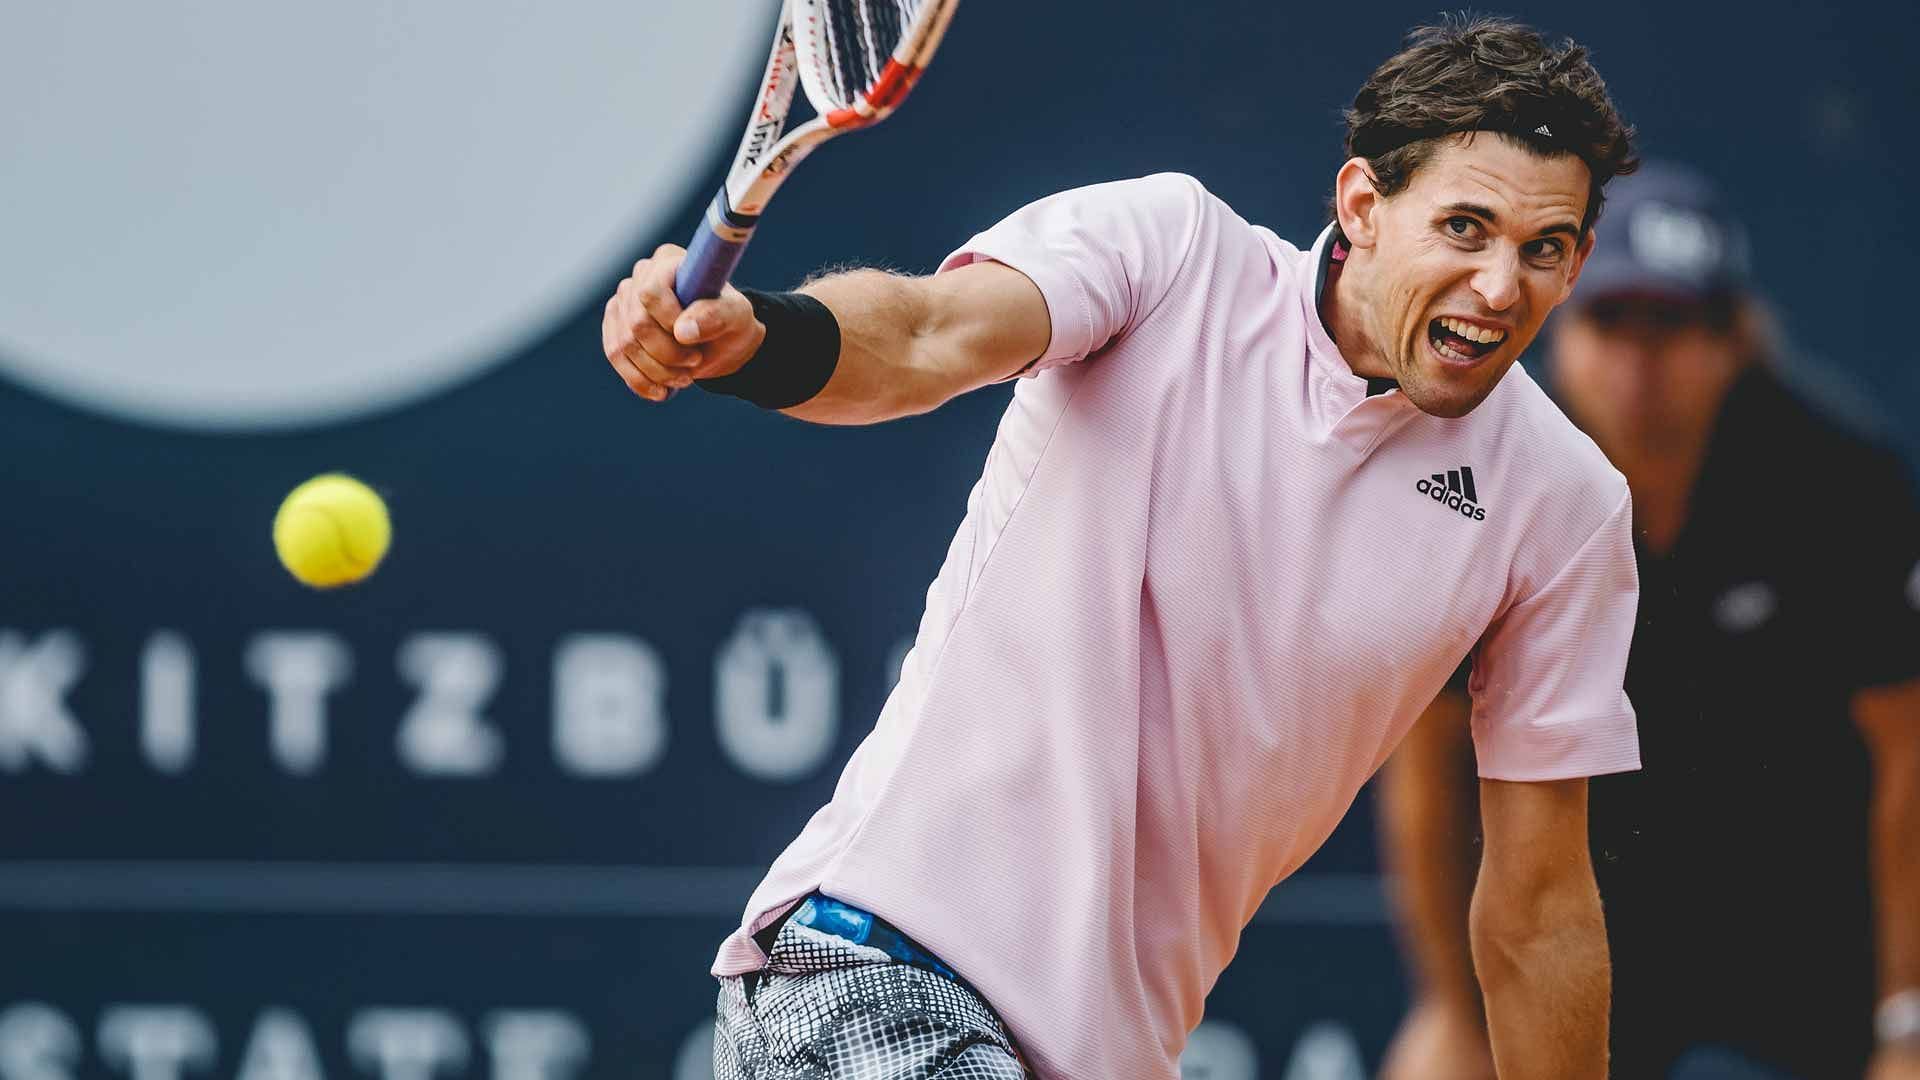 Dominic Thiem wins 1st match of 2023 at Argentina Open - NBC Sports